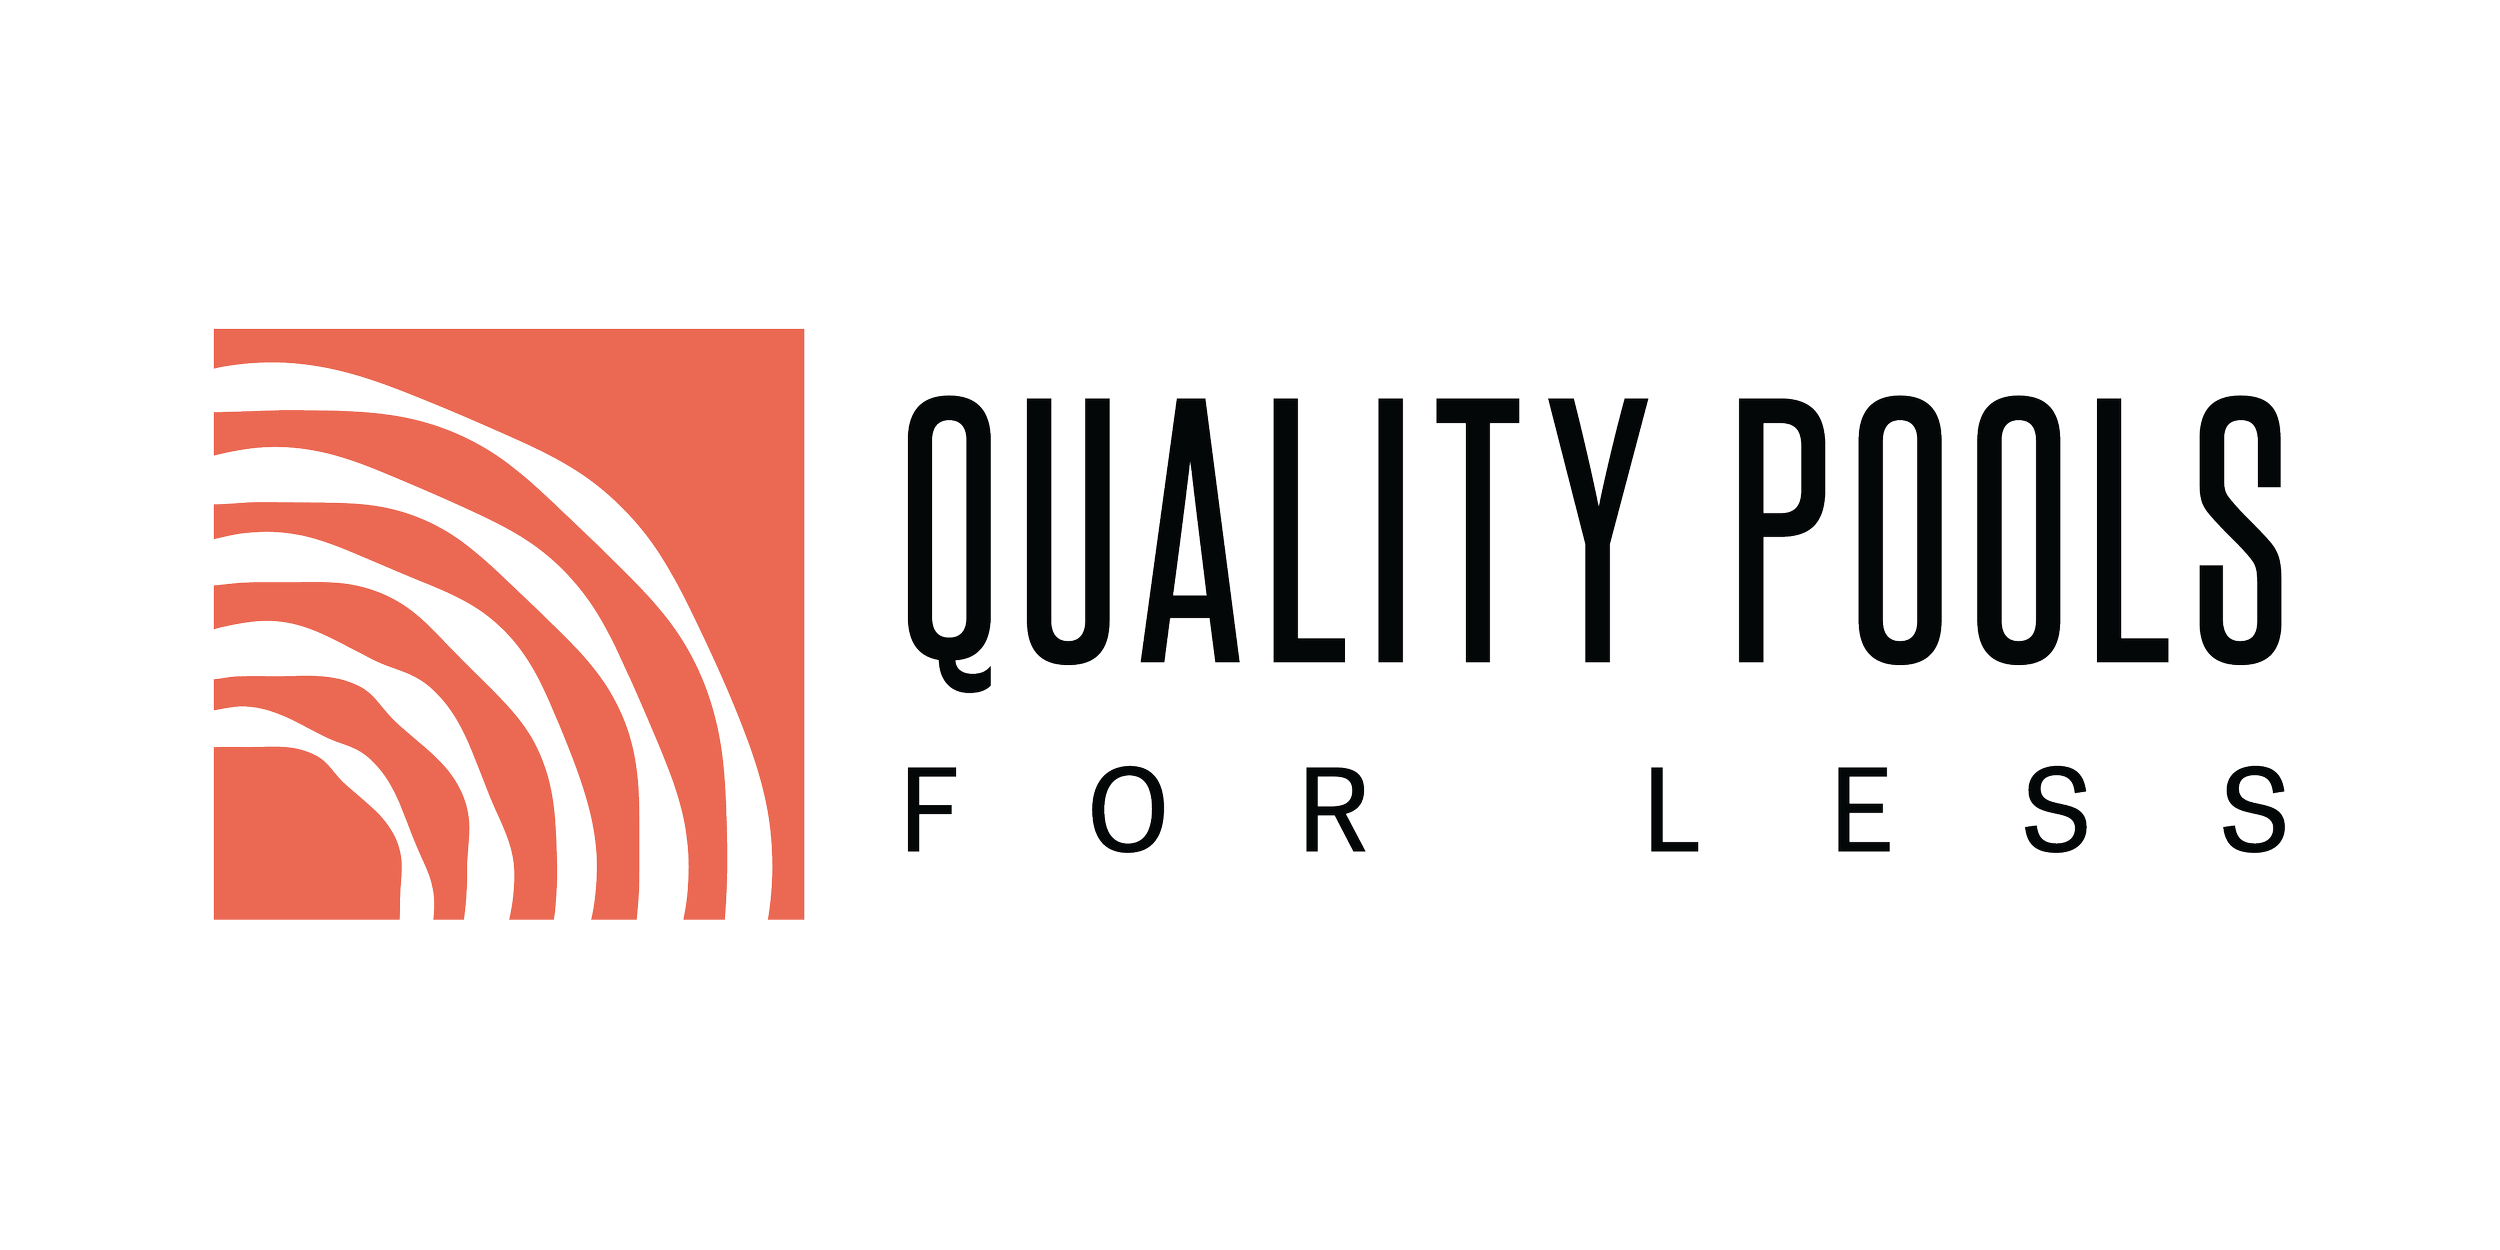 Quality Pools For Less (Copy)